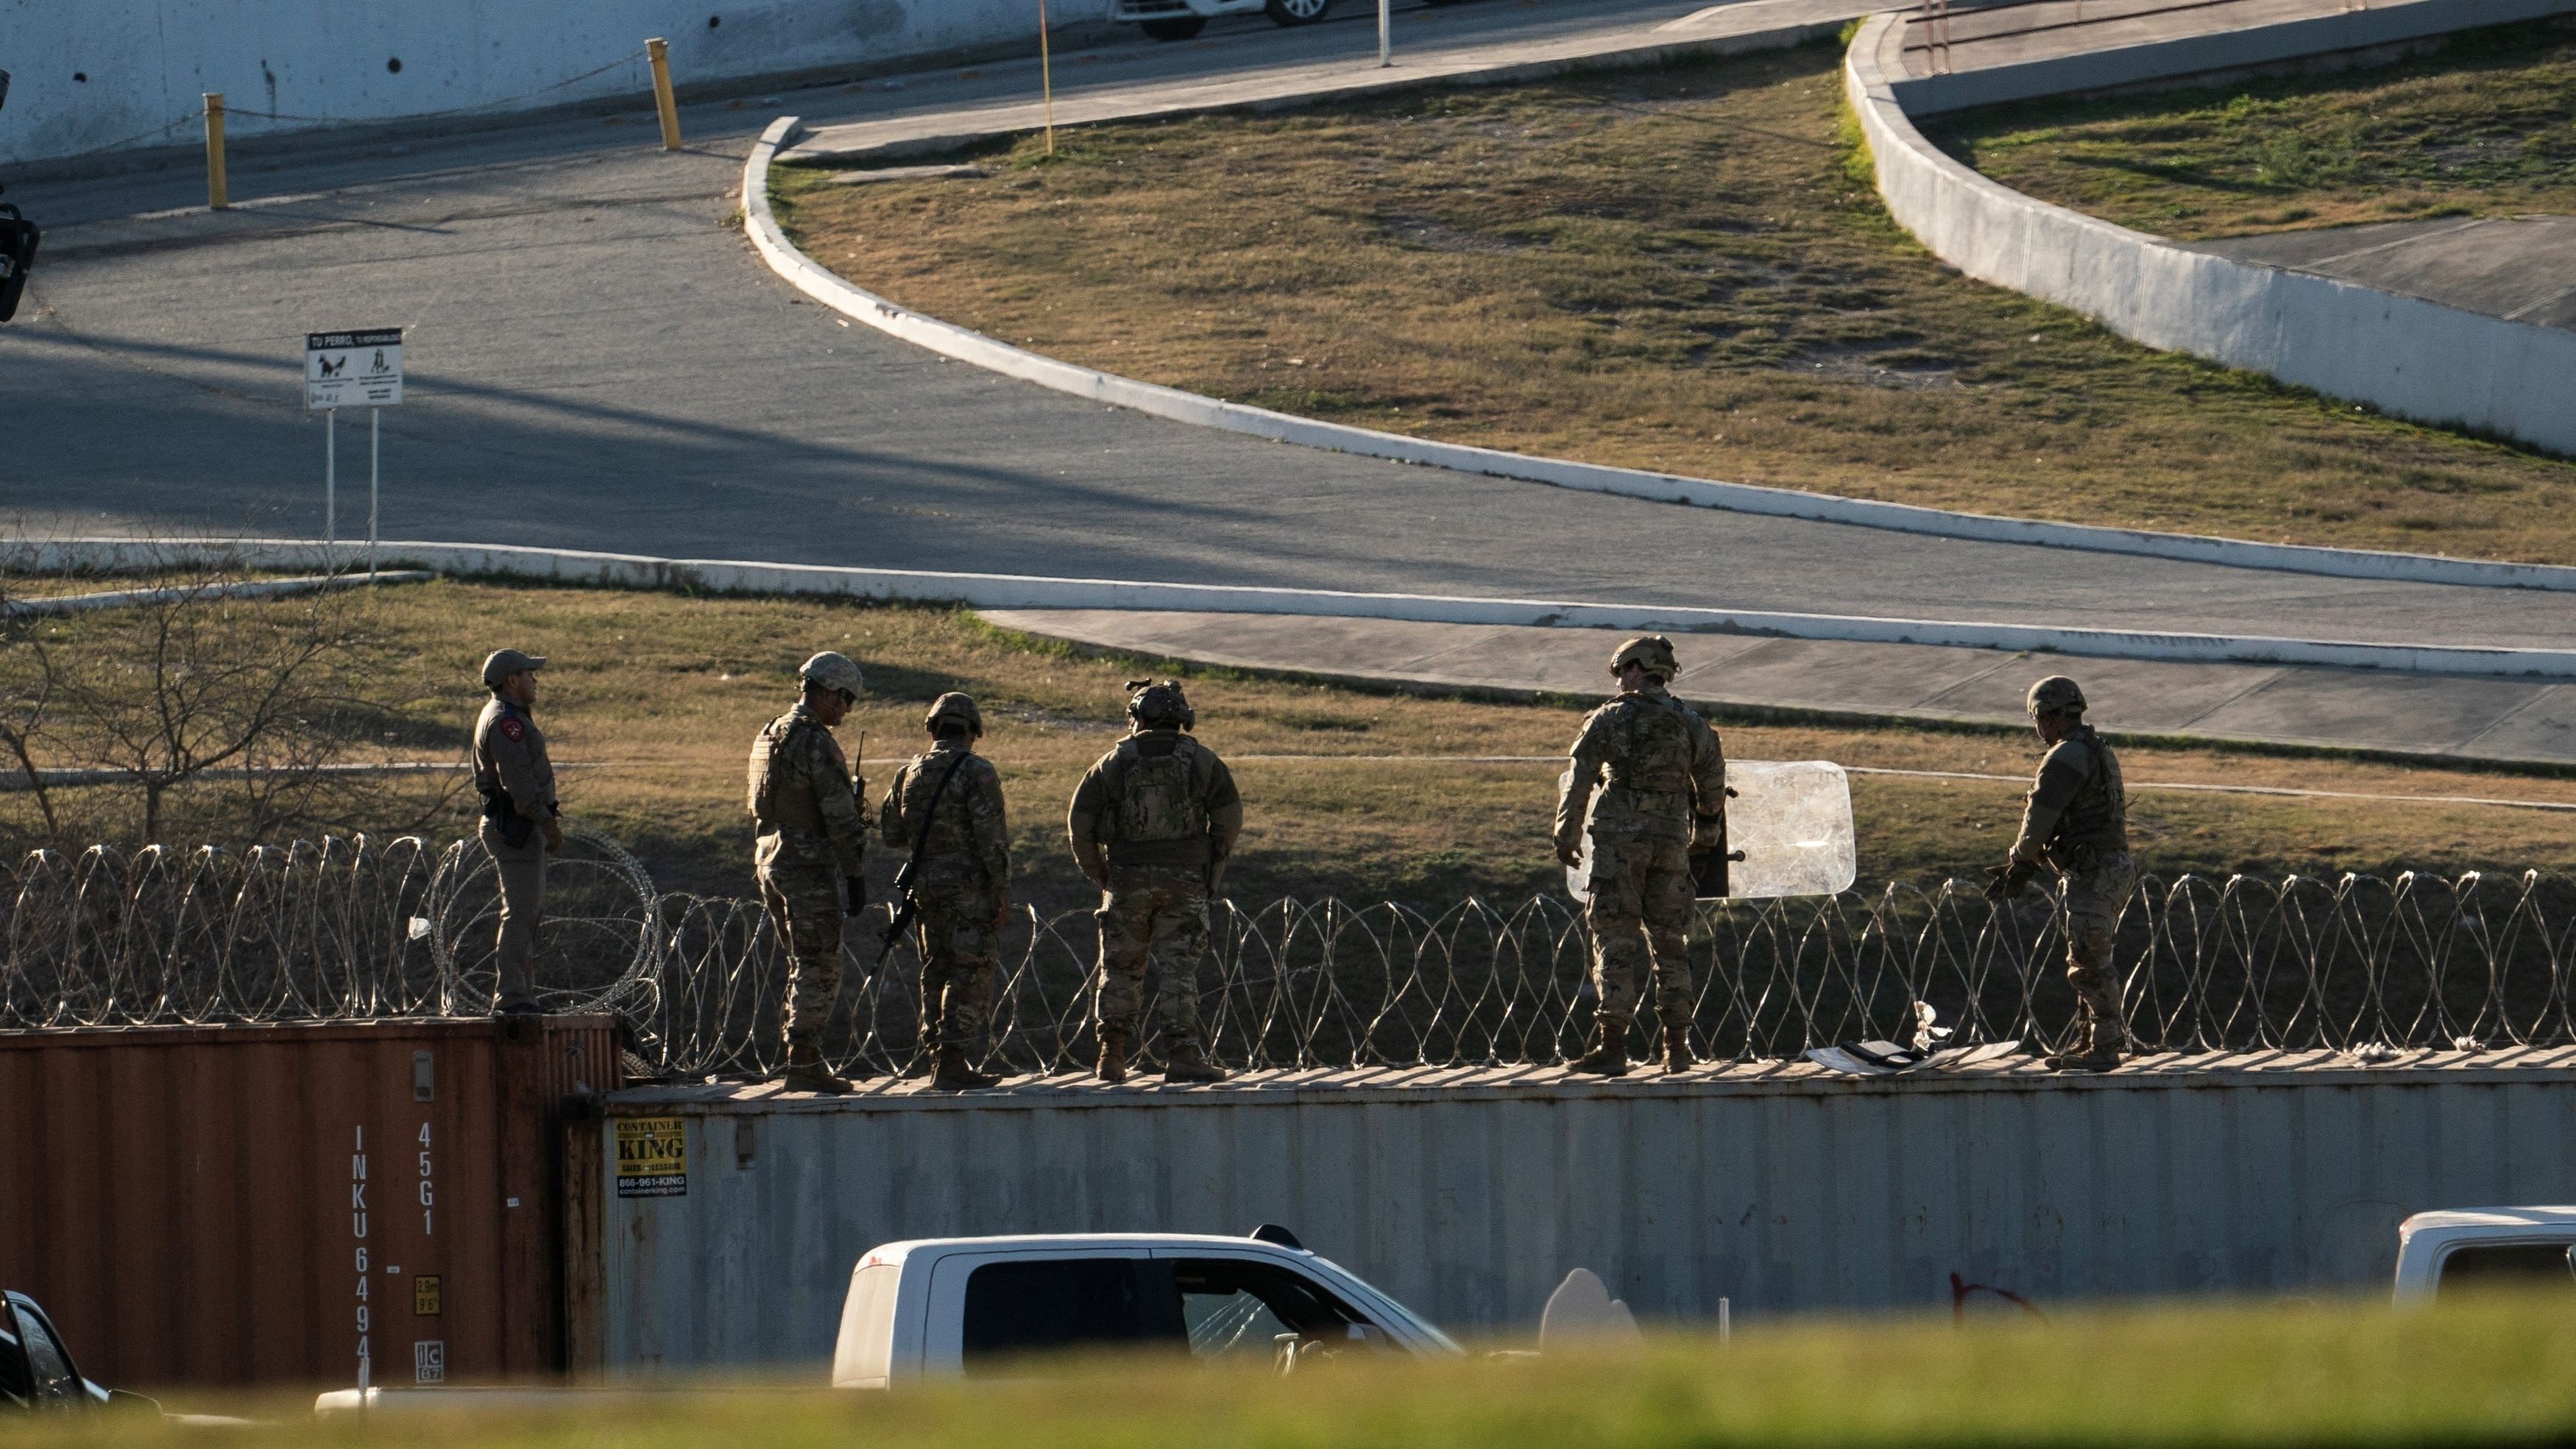 <div class="paragraphs"><p>US National Guard soldiers stand on shipping containers which are used as border fences on the bank of the Rio Grande river in Eagle Pass, Texas, US.</p></div>